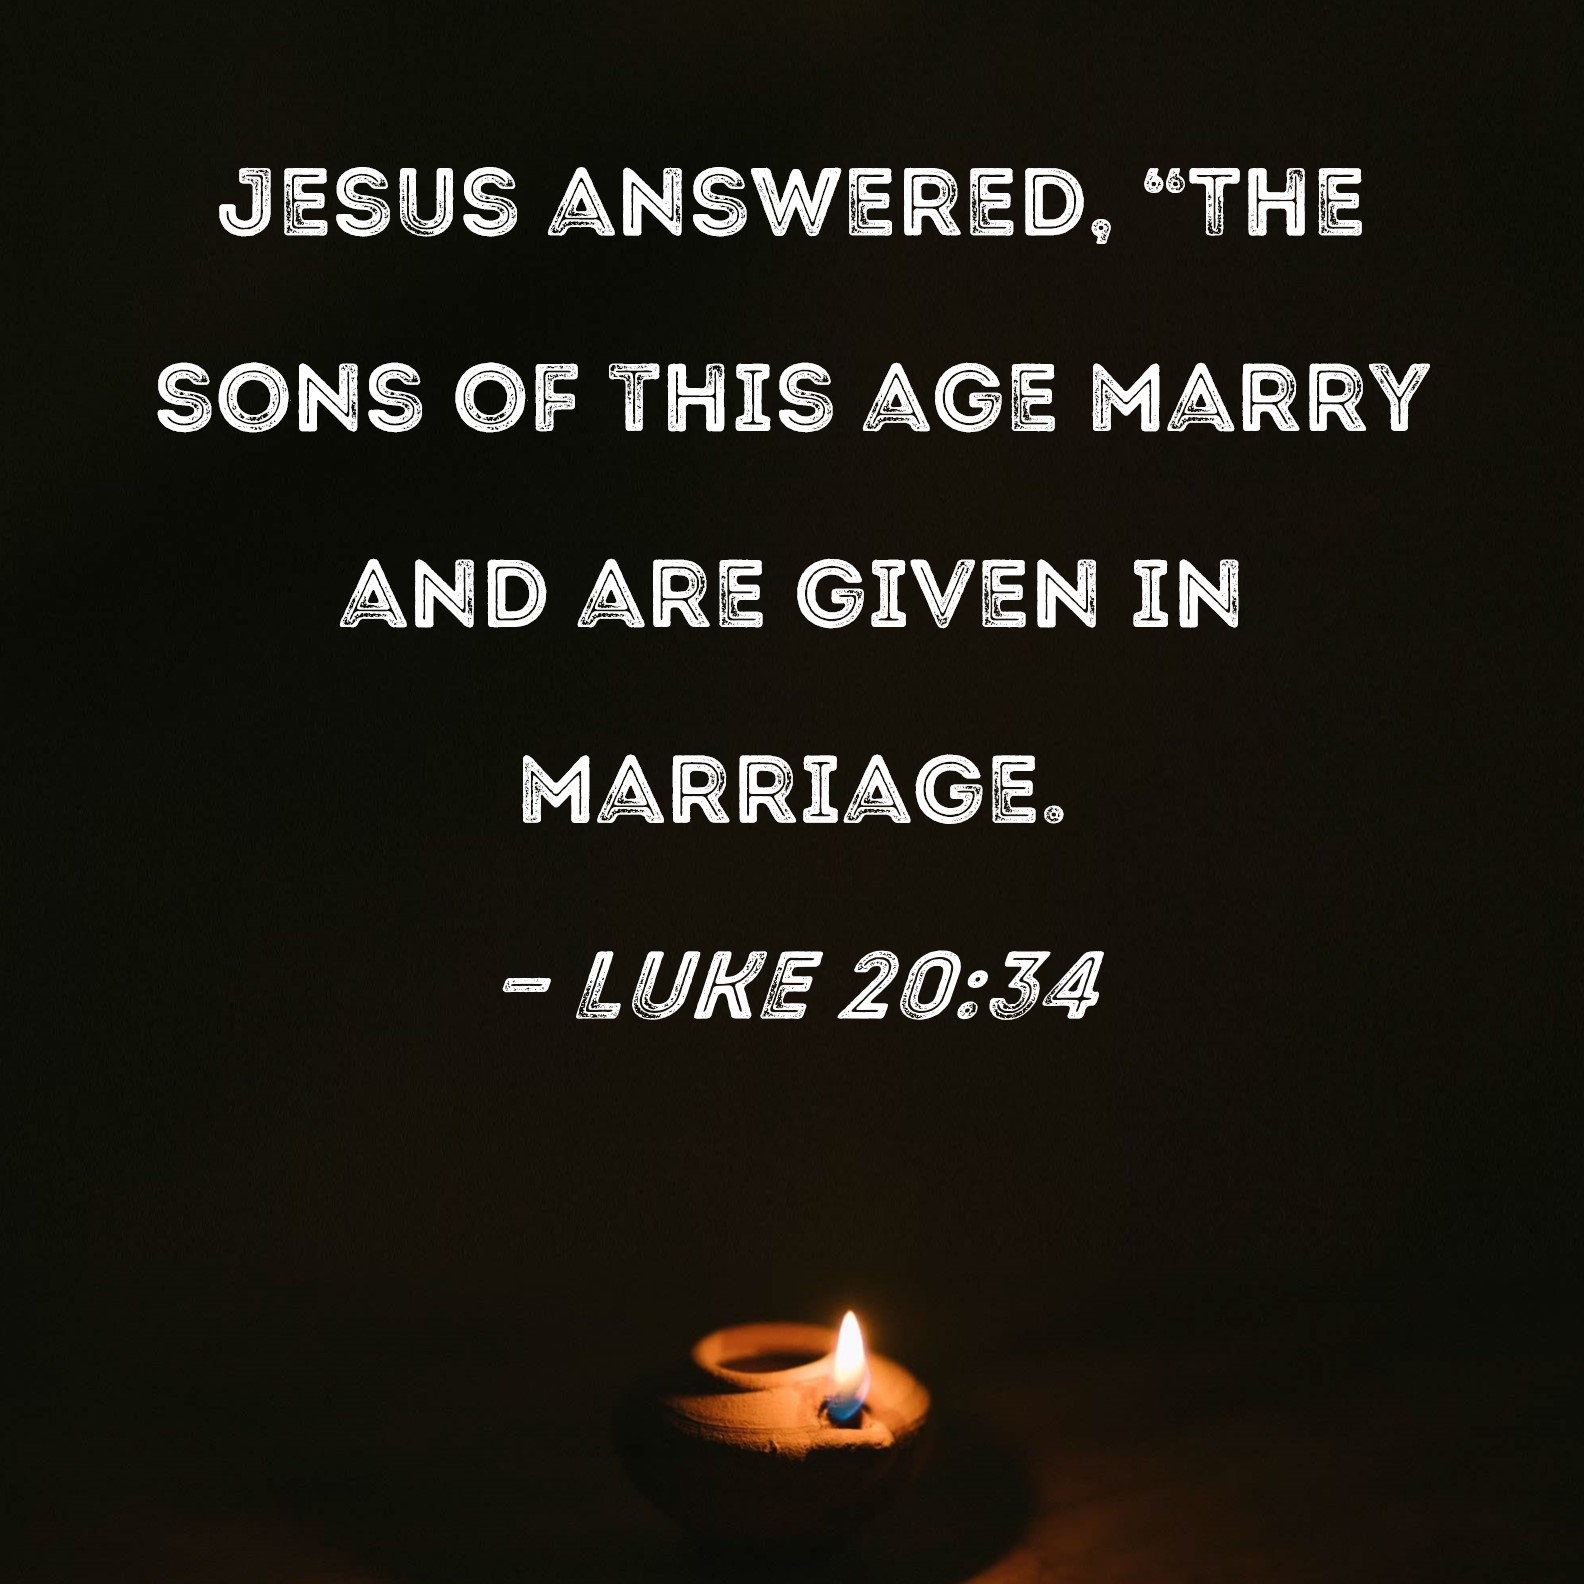 luke-20-34-jesus-answered-the-sons-of-this-age-marry-and-are-given-in